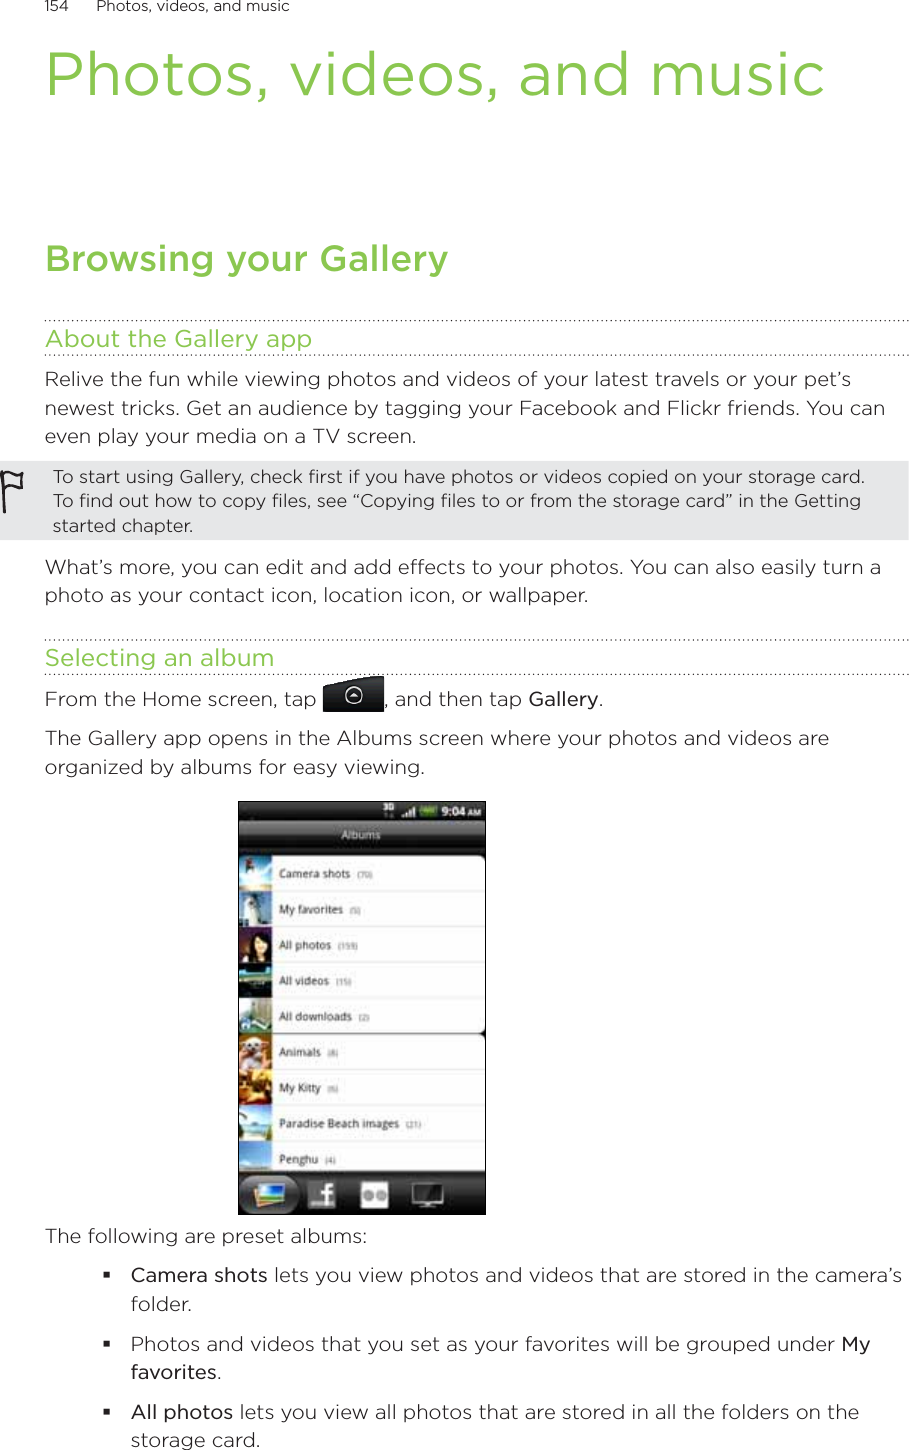 154      Photos, videos, and music      Photos, videos, and musicBrowsing your GalleryAbout the Gallery appRelive the fun while viewing photos and videos of your latest travels or your pet’s newest tricks. Get an audience by tagging your Facebook and Flickr friends. You can even play your media on a TV screen.To start using Gallery, check first if you have photos or videos copied on your storage card. To find out how to copy files, see “Copying files to or from the storage card” in the Getting started chapter.What’s more, you can edit and add effects to your photos. You can also easily turn a photo as your contact icon, location icon, or wallpaper.Selecting an albumFrom the Home screen, tap  , and then tap Gallery.The Gallery app opens in the Albums screen where your photos and videos are organized by albums for easy viewing.The following are preset albums:Camera shots lets you view photos and videos that are stored in the camera’s folder.Photos and videos that you set as your favorites will be grouped under My favorites.All photos lets you view all photos that are stored in all the folders on the storage card.